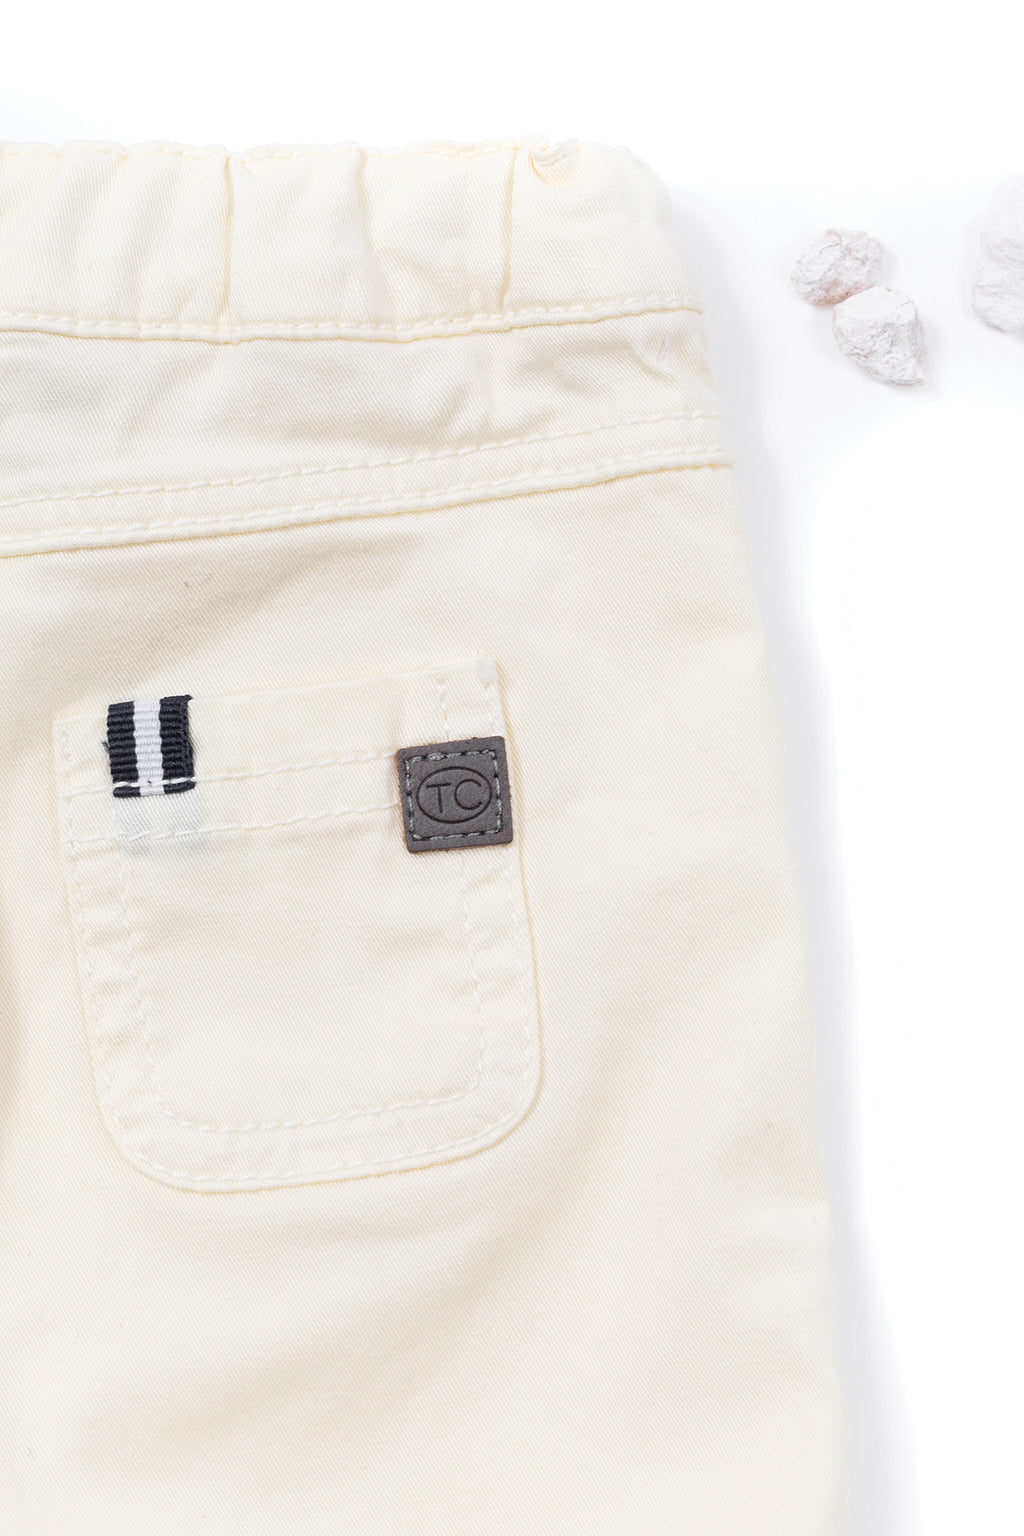 Trousers - Twill Yellow pale